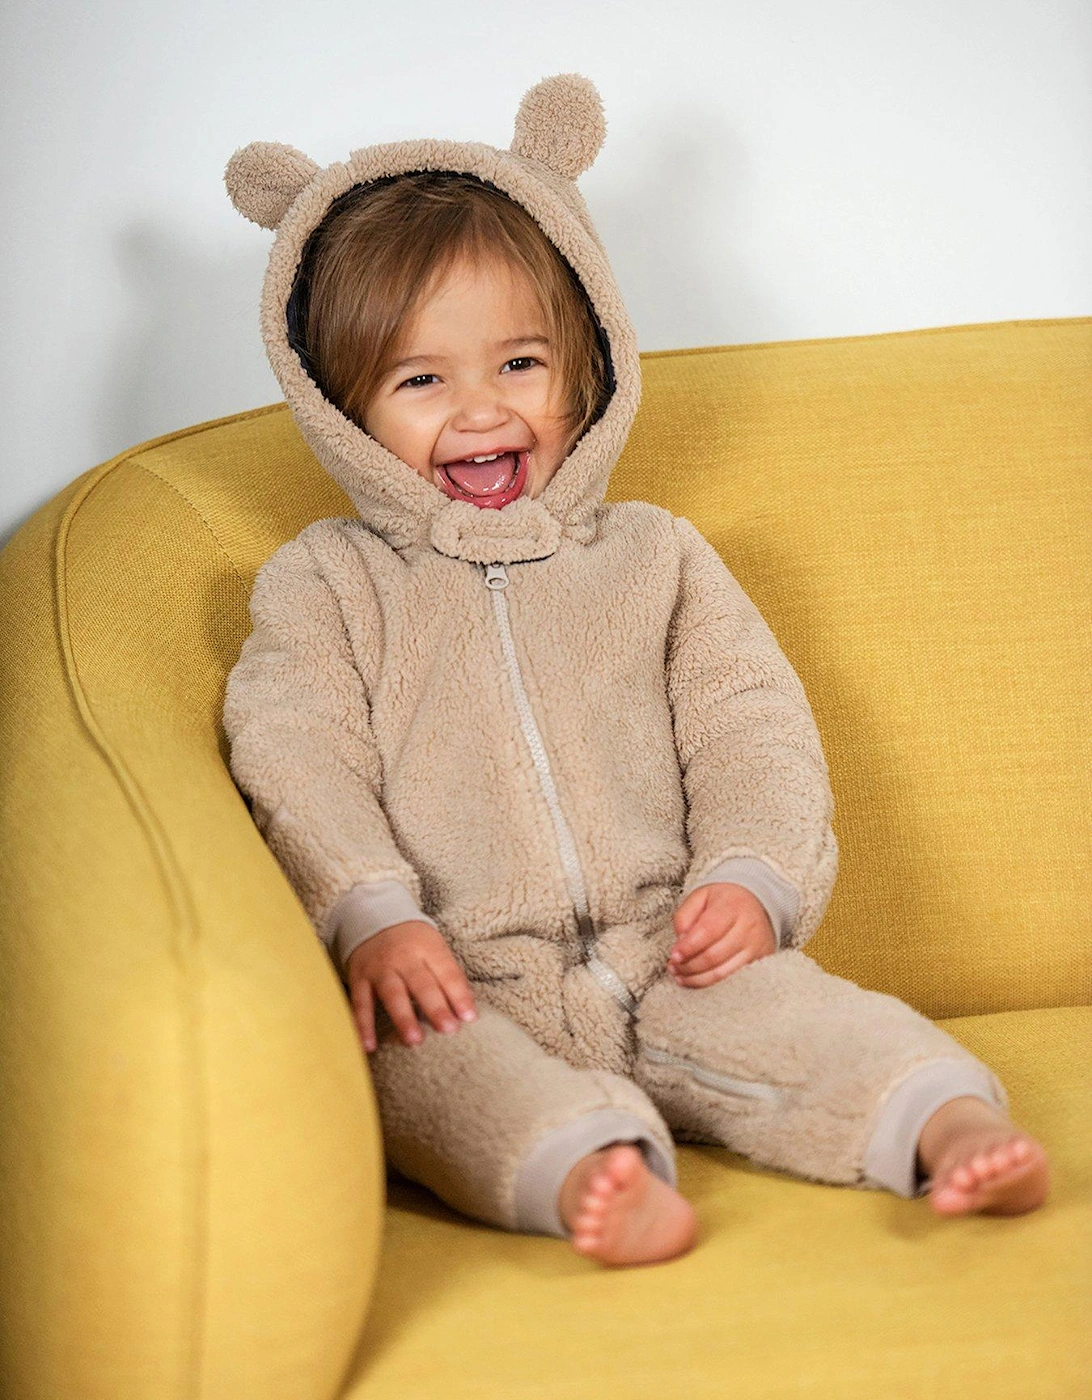 Baby Toasty Ted Snuggle Suit - Brown